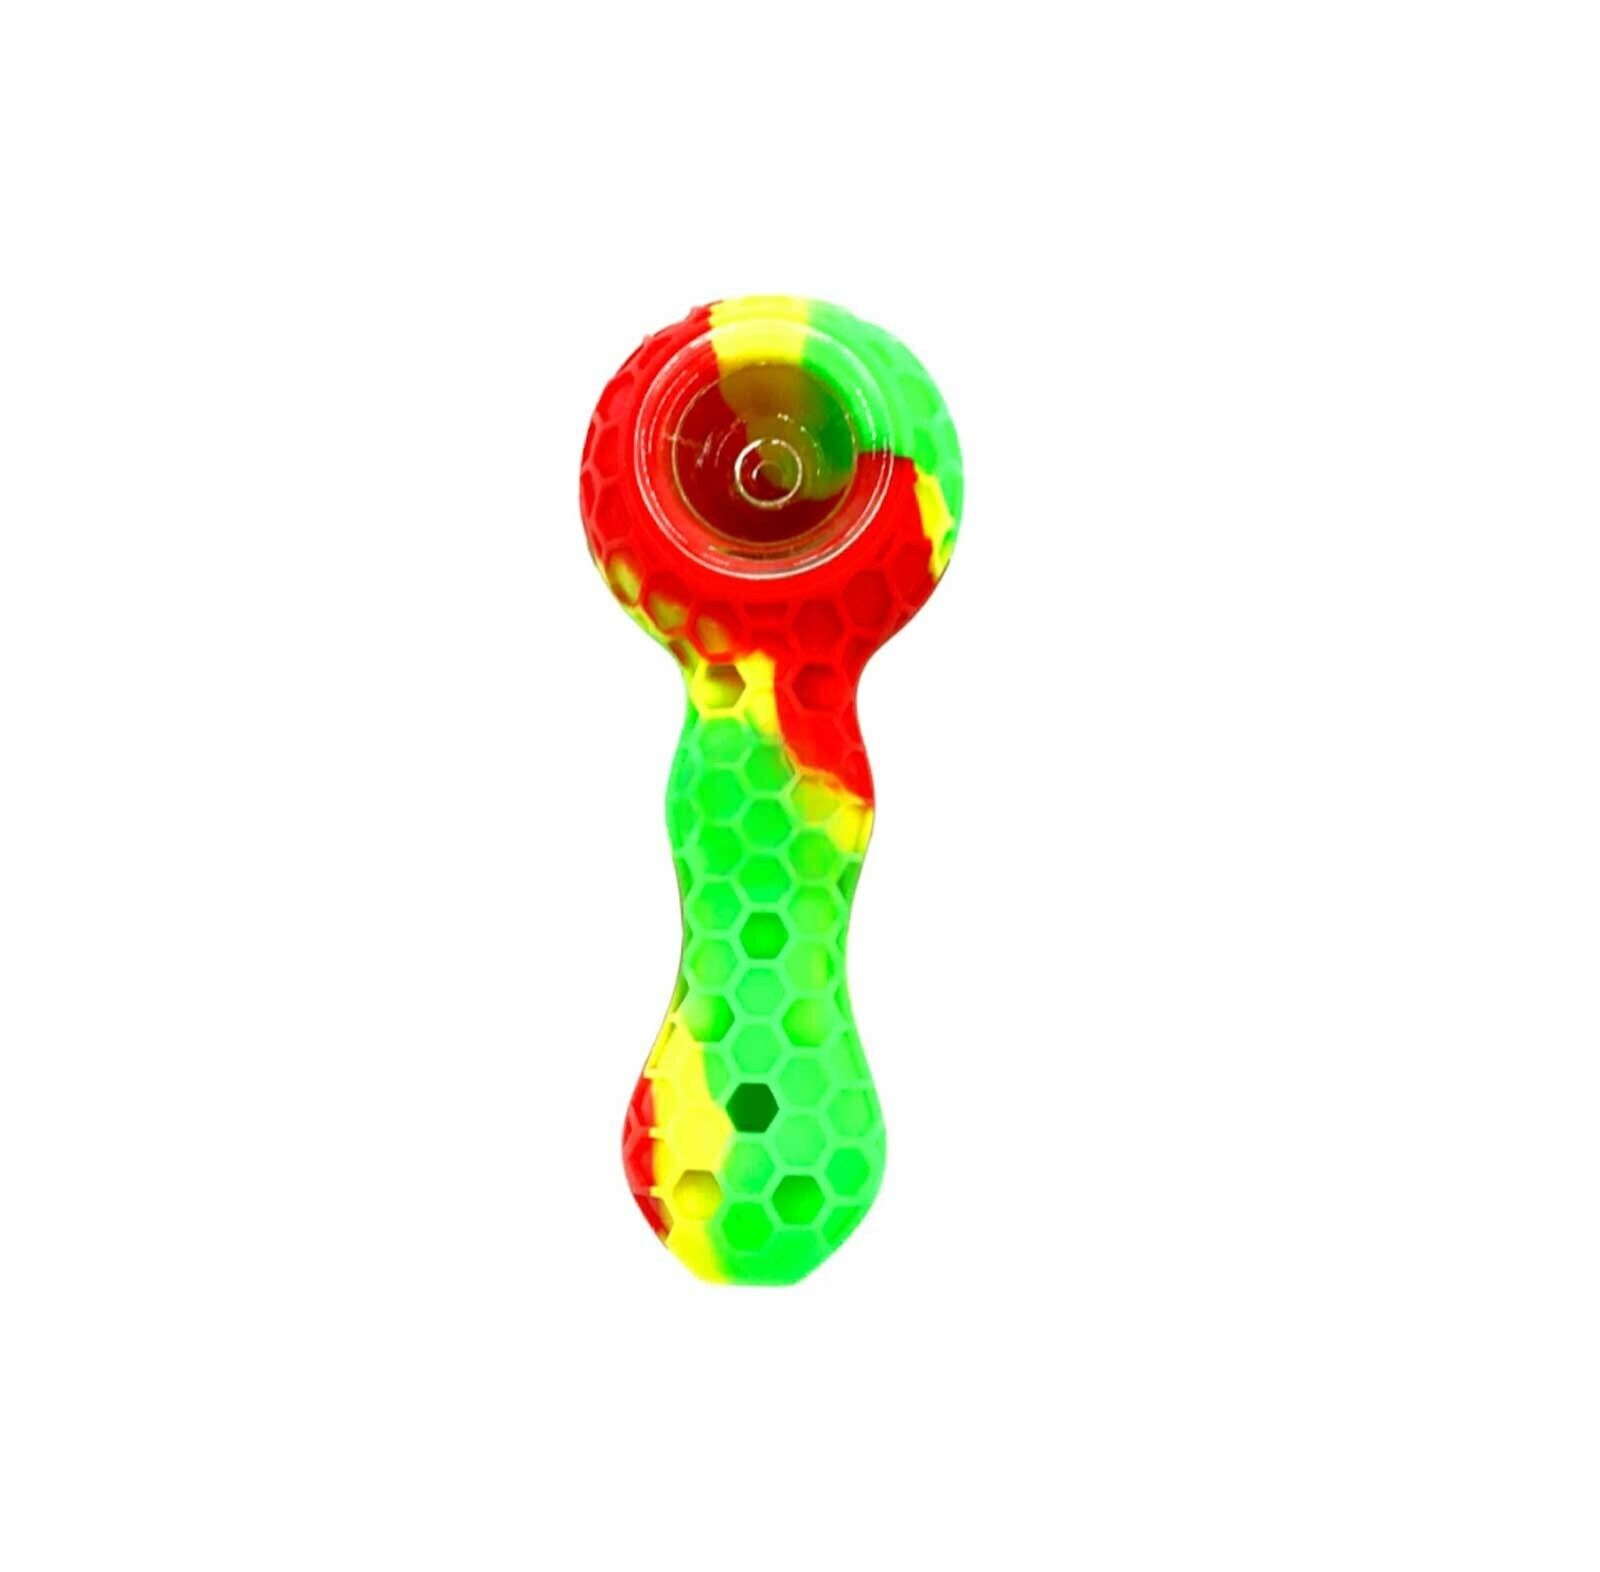 Unbreakable Silicone Tobacco Smoking Pipe w/ Glass Bowl RED GREEN YELLOW